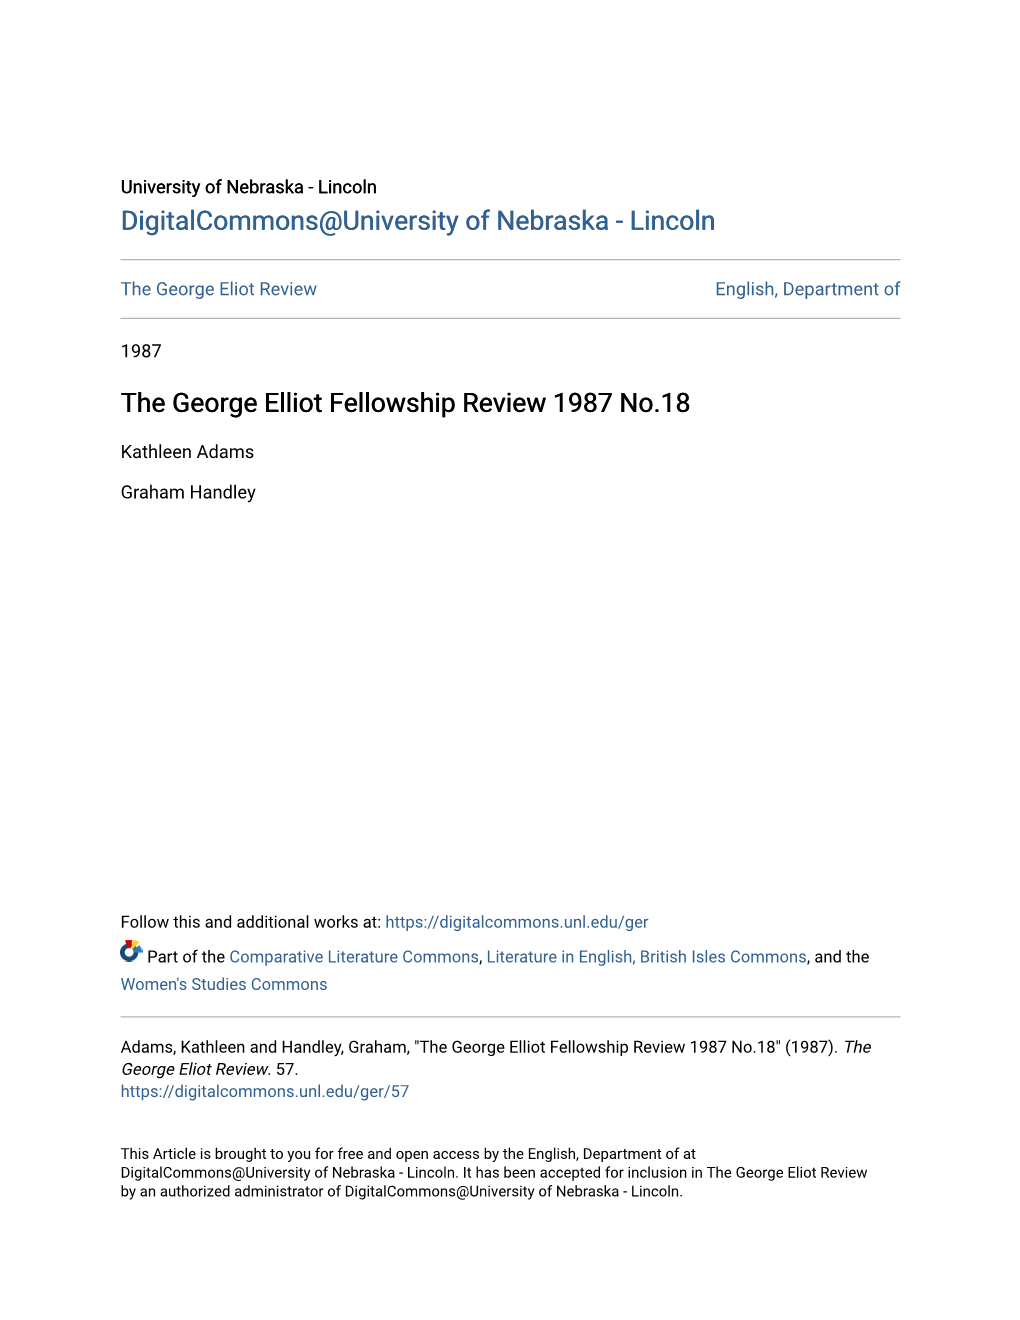 The George Elliot Fellowship Review 1987 No.18